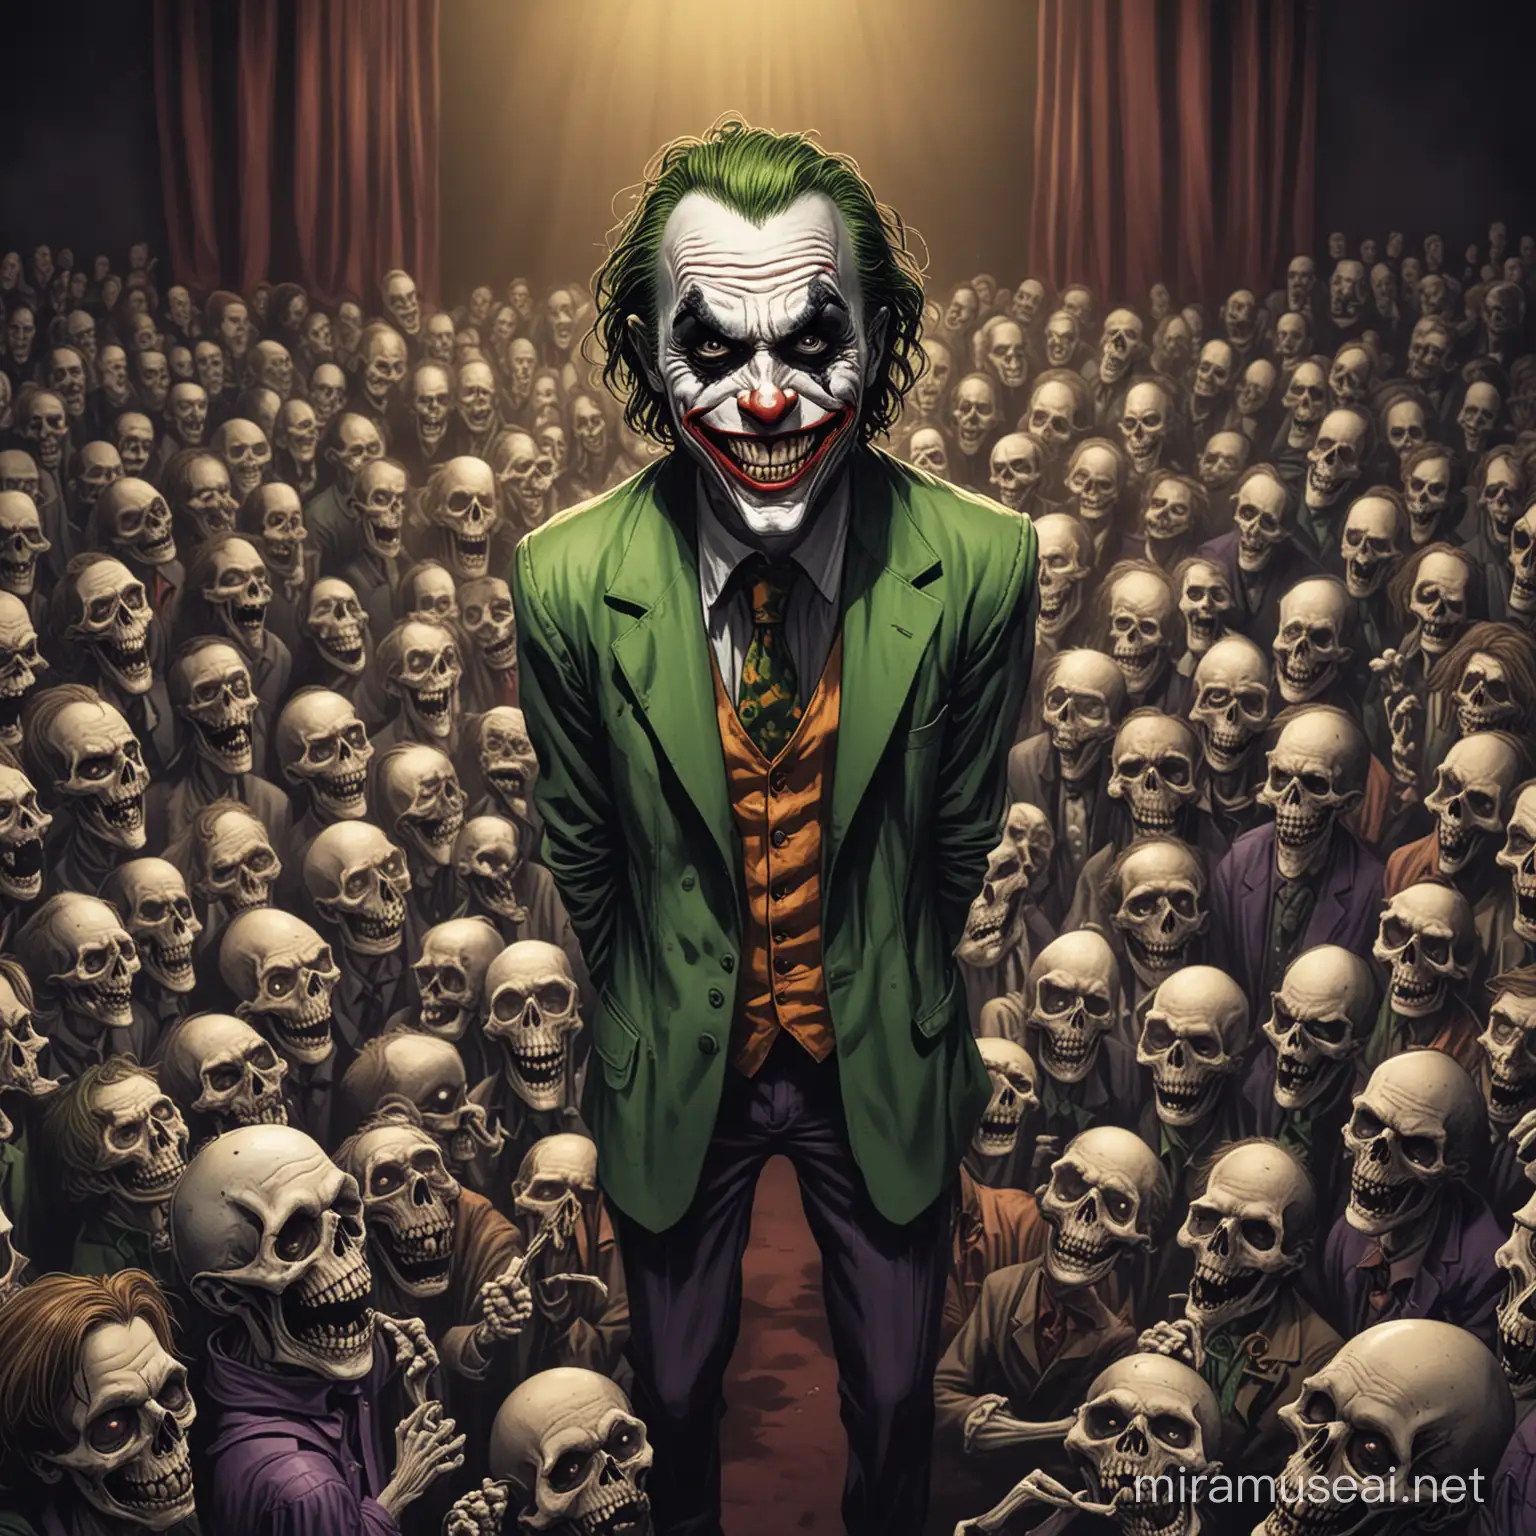 Give me a picture of a cartoonish caricature of joker in high angle in a stage doing stand up comedy with dead people or skeletons as an audience for a tshirt design